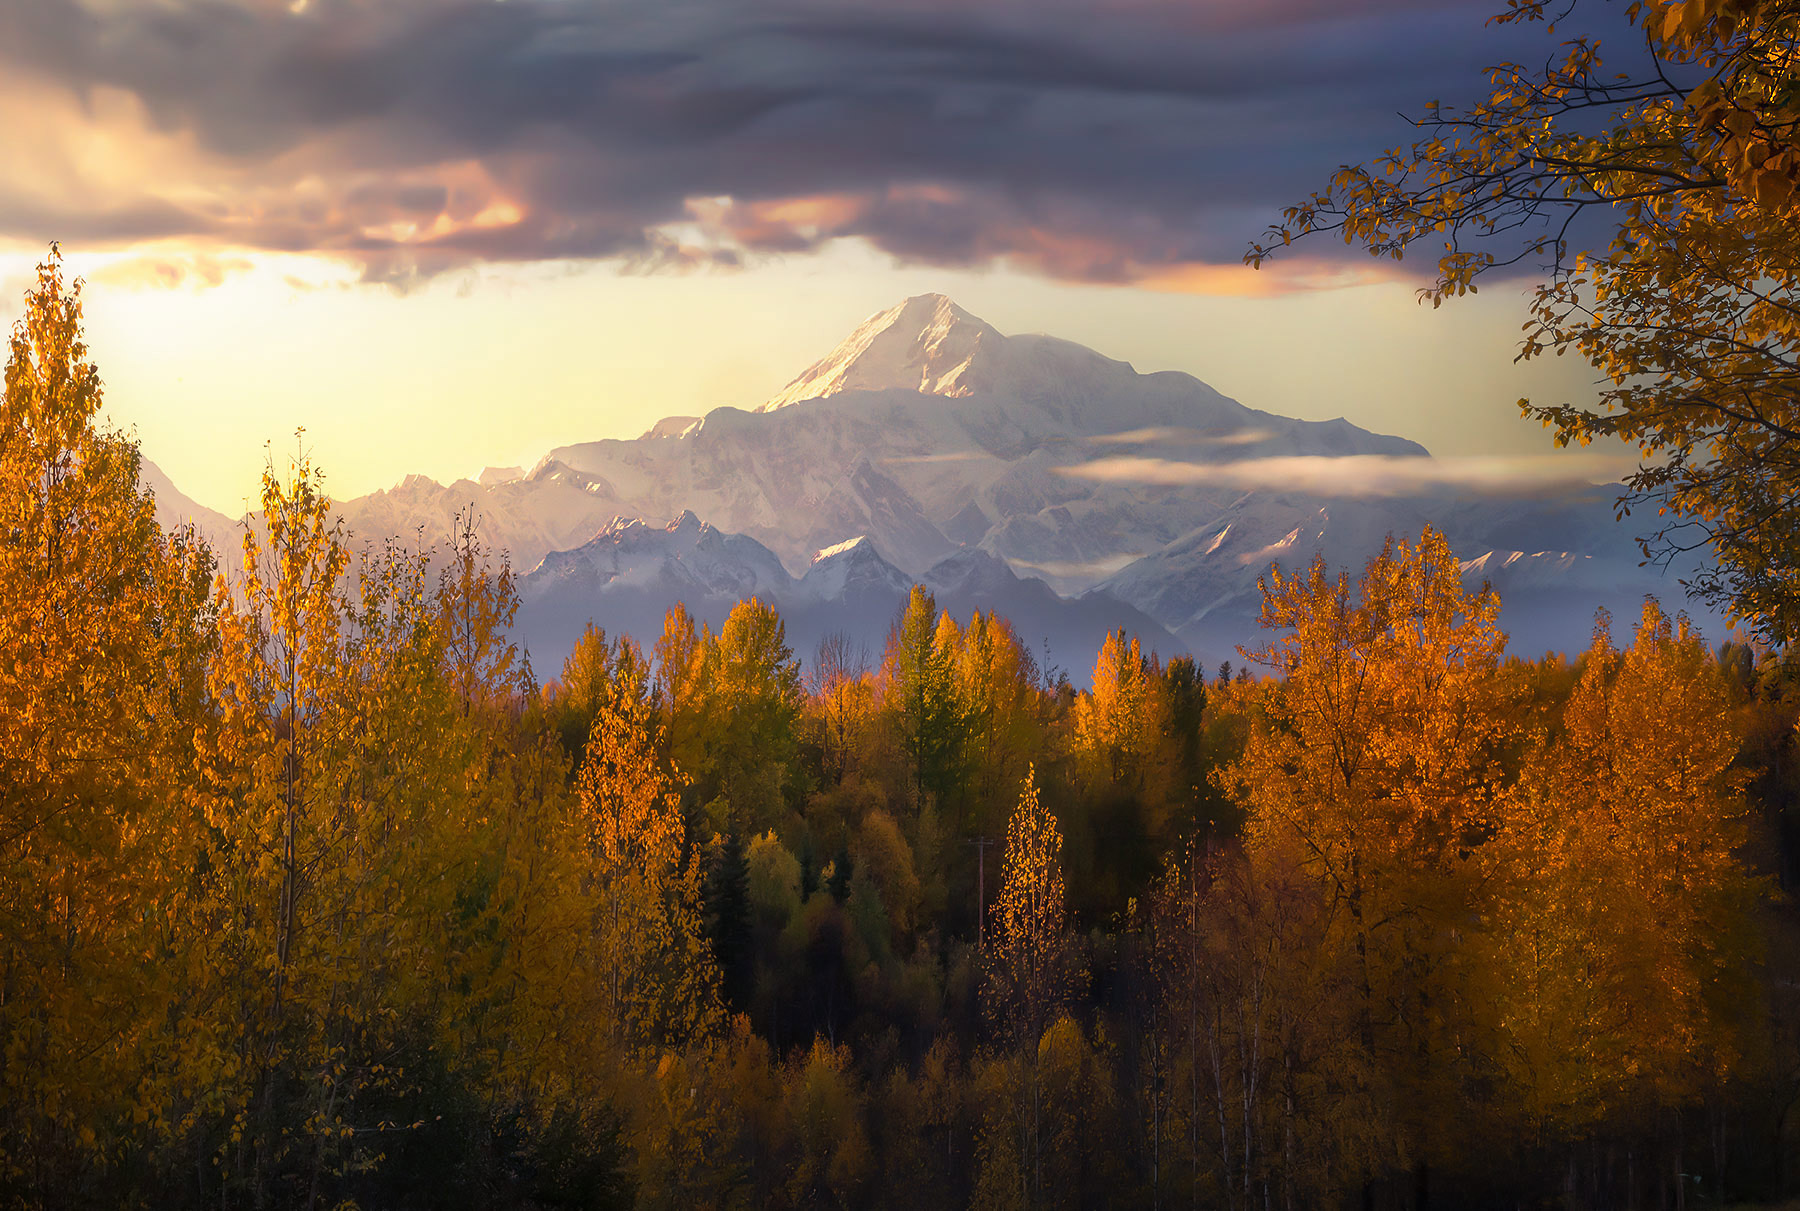 The great peak catches the last light of sunset in Autumn